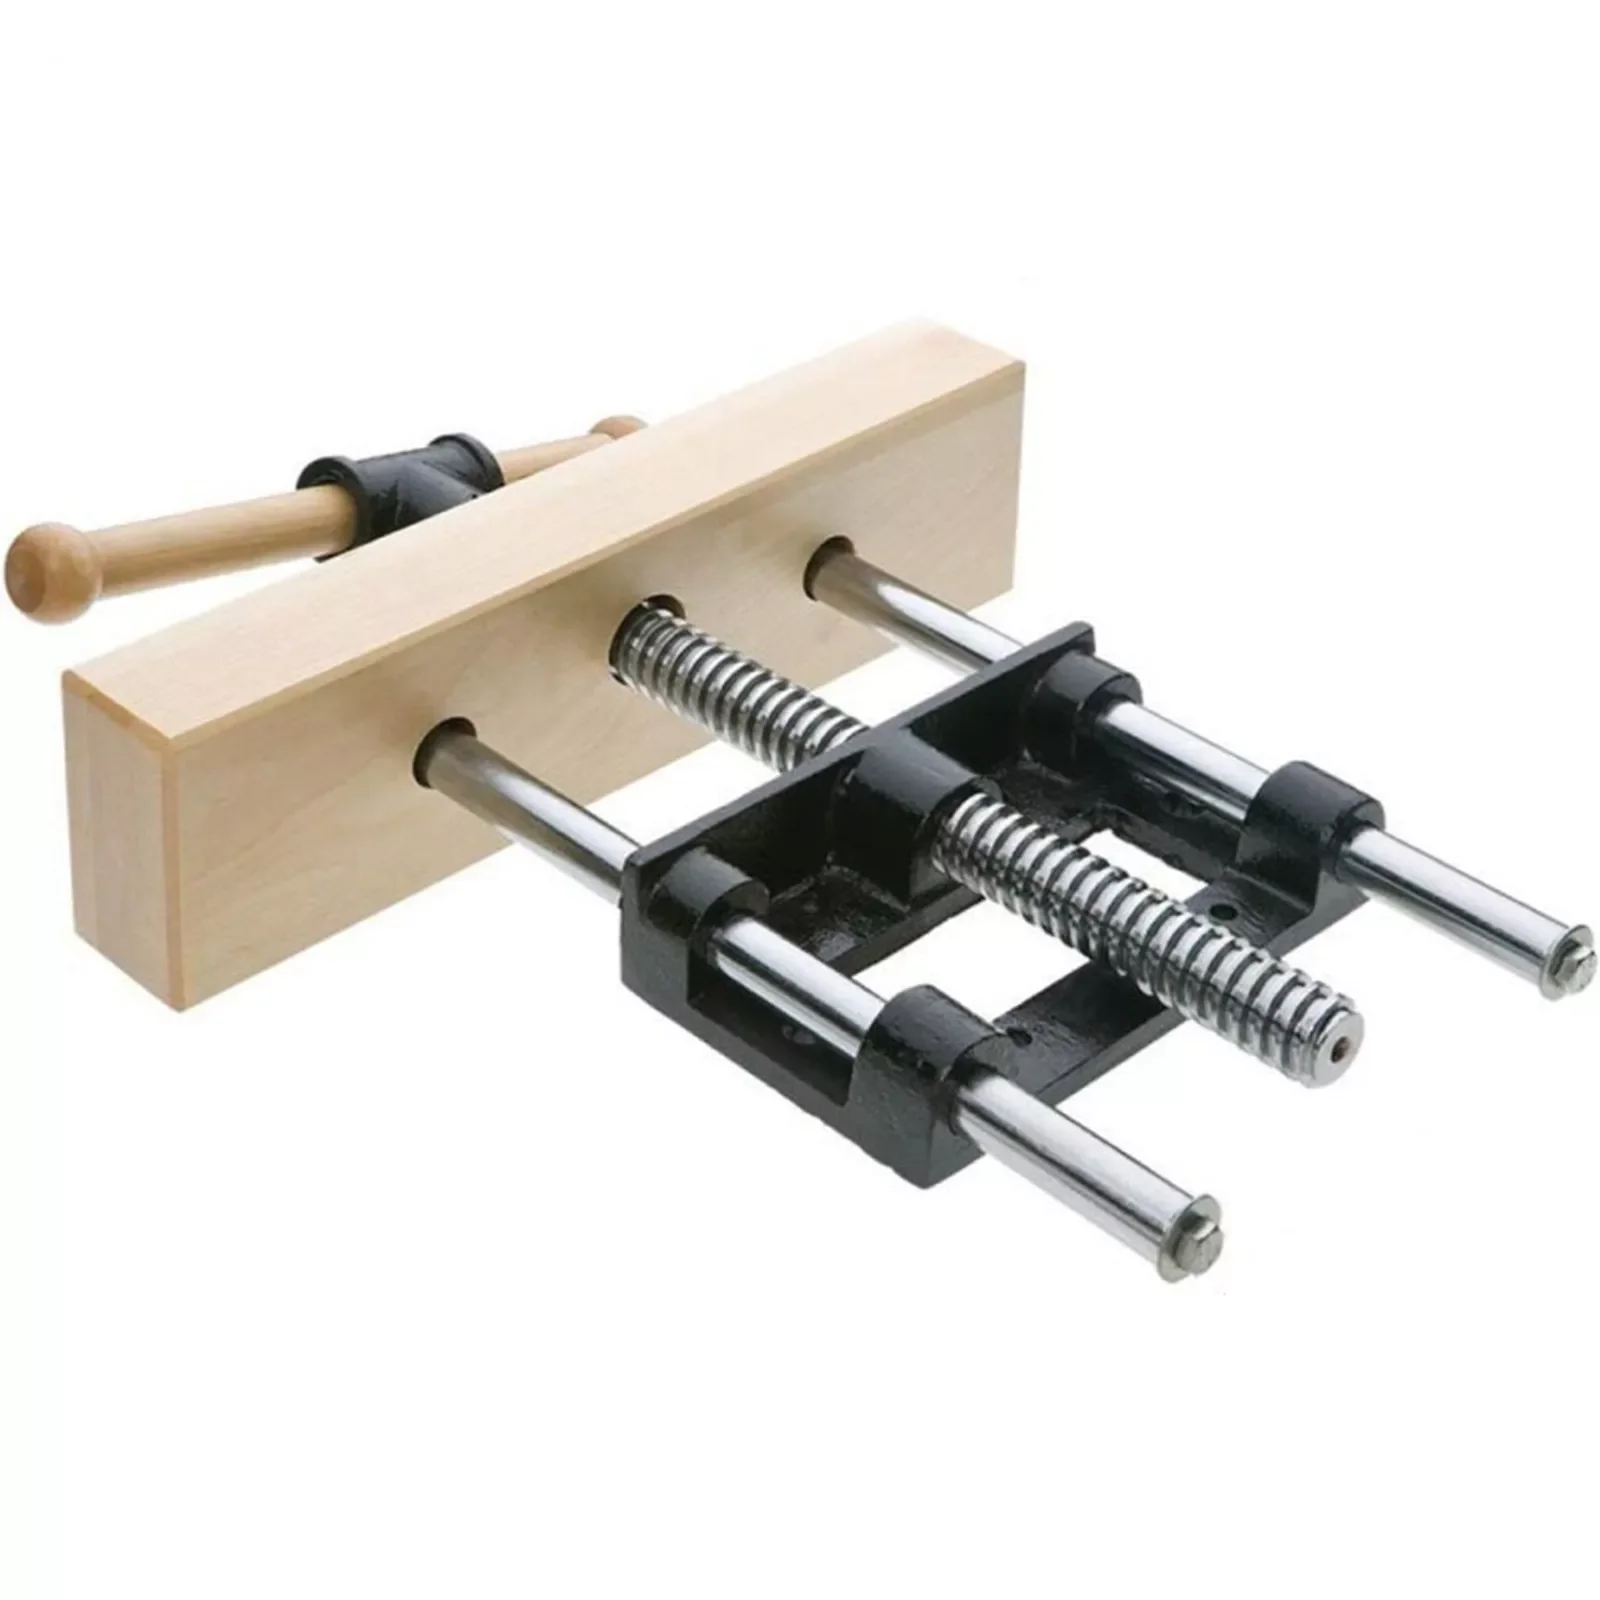 Woodworking Vice Wood Vice 18cm High Performance Table Clamp Bed Metal Table Jaw Fixed Repair Vice Tool For Engineering Welding enlarge